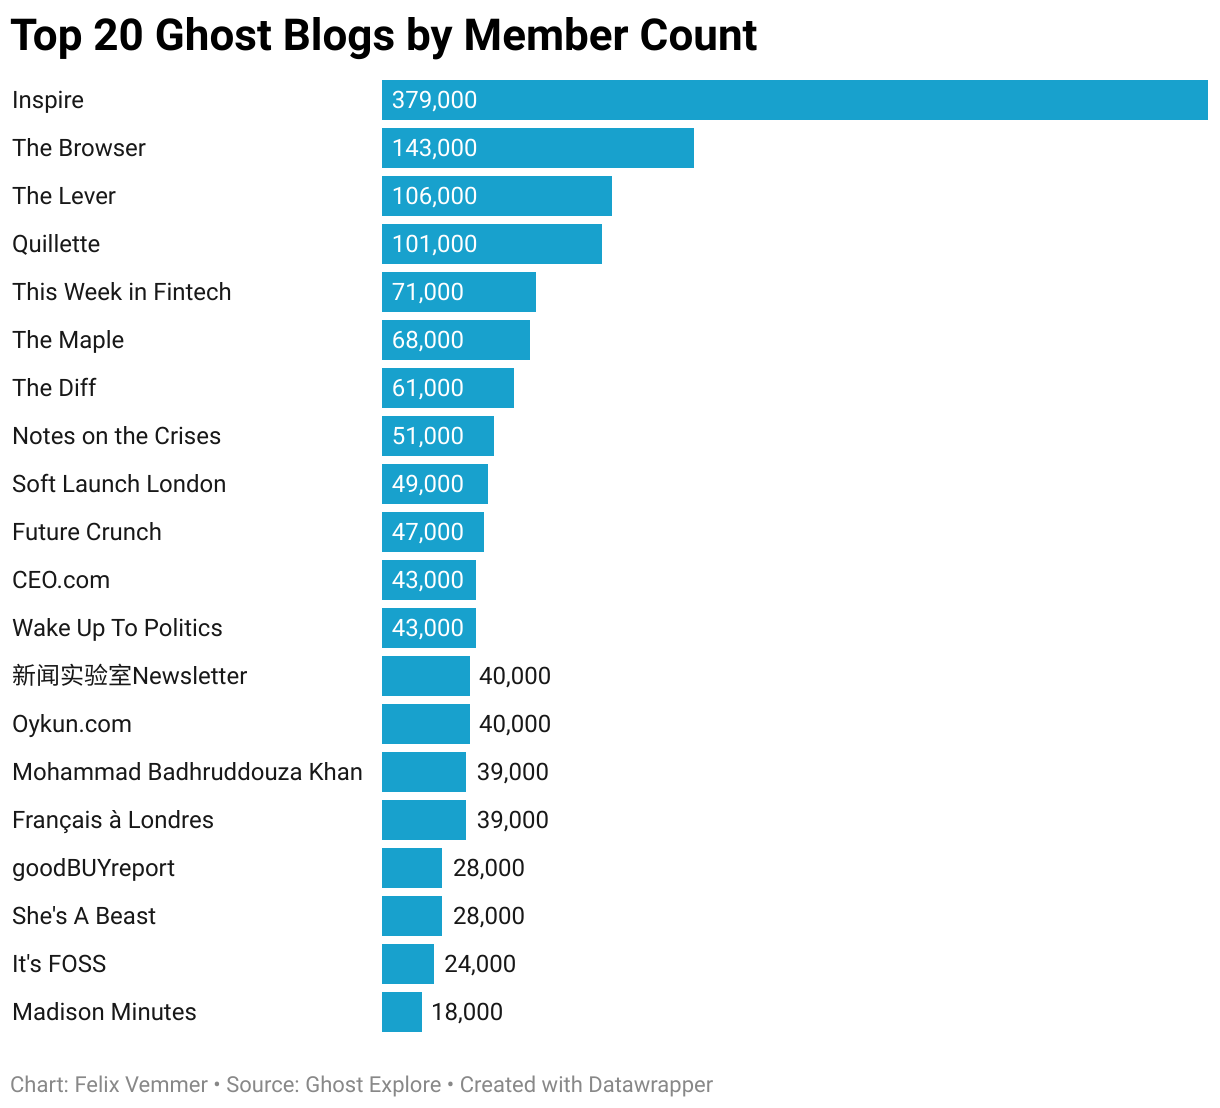 A table displaying the 20 most subscribed Ghost blogs, ranked by their member count. Each entry provides the blog title and the respective number of members.